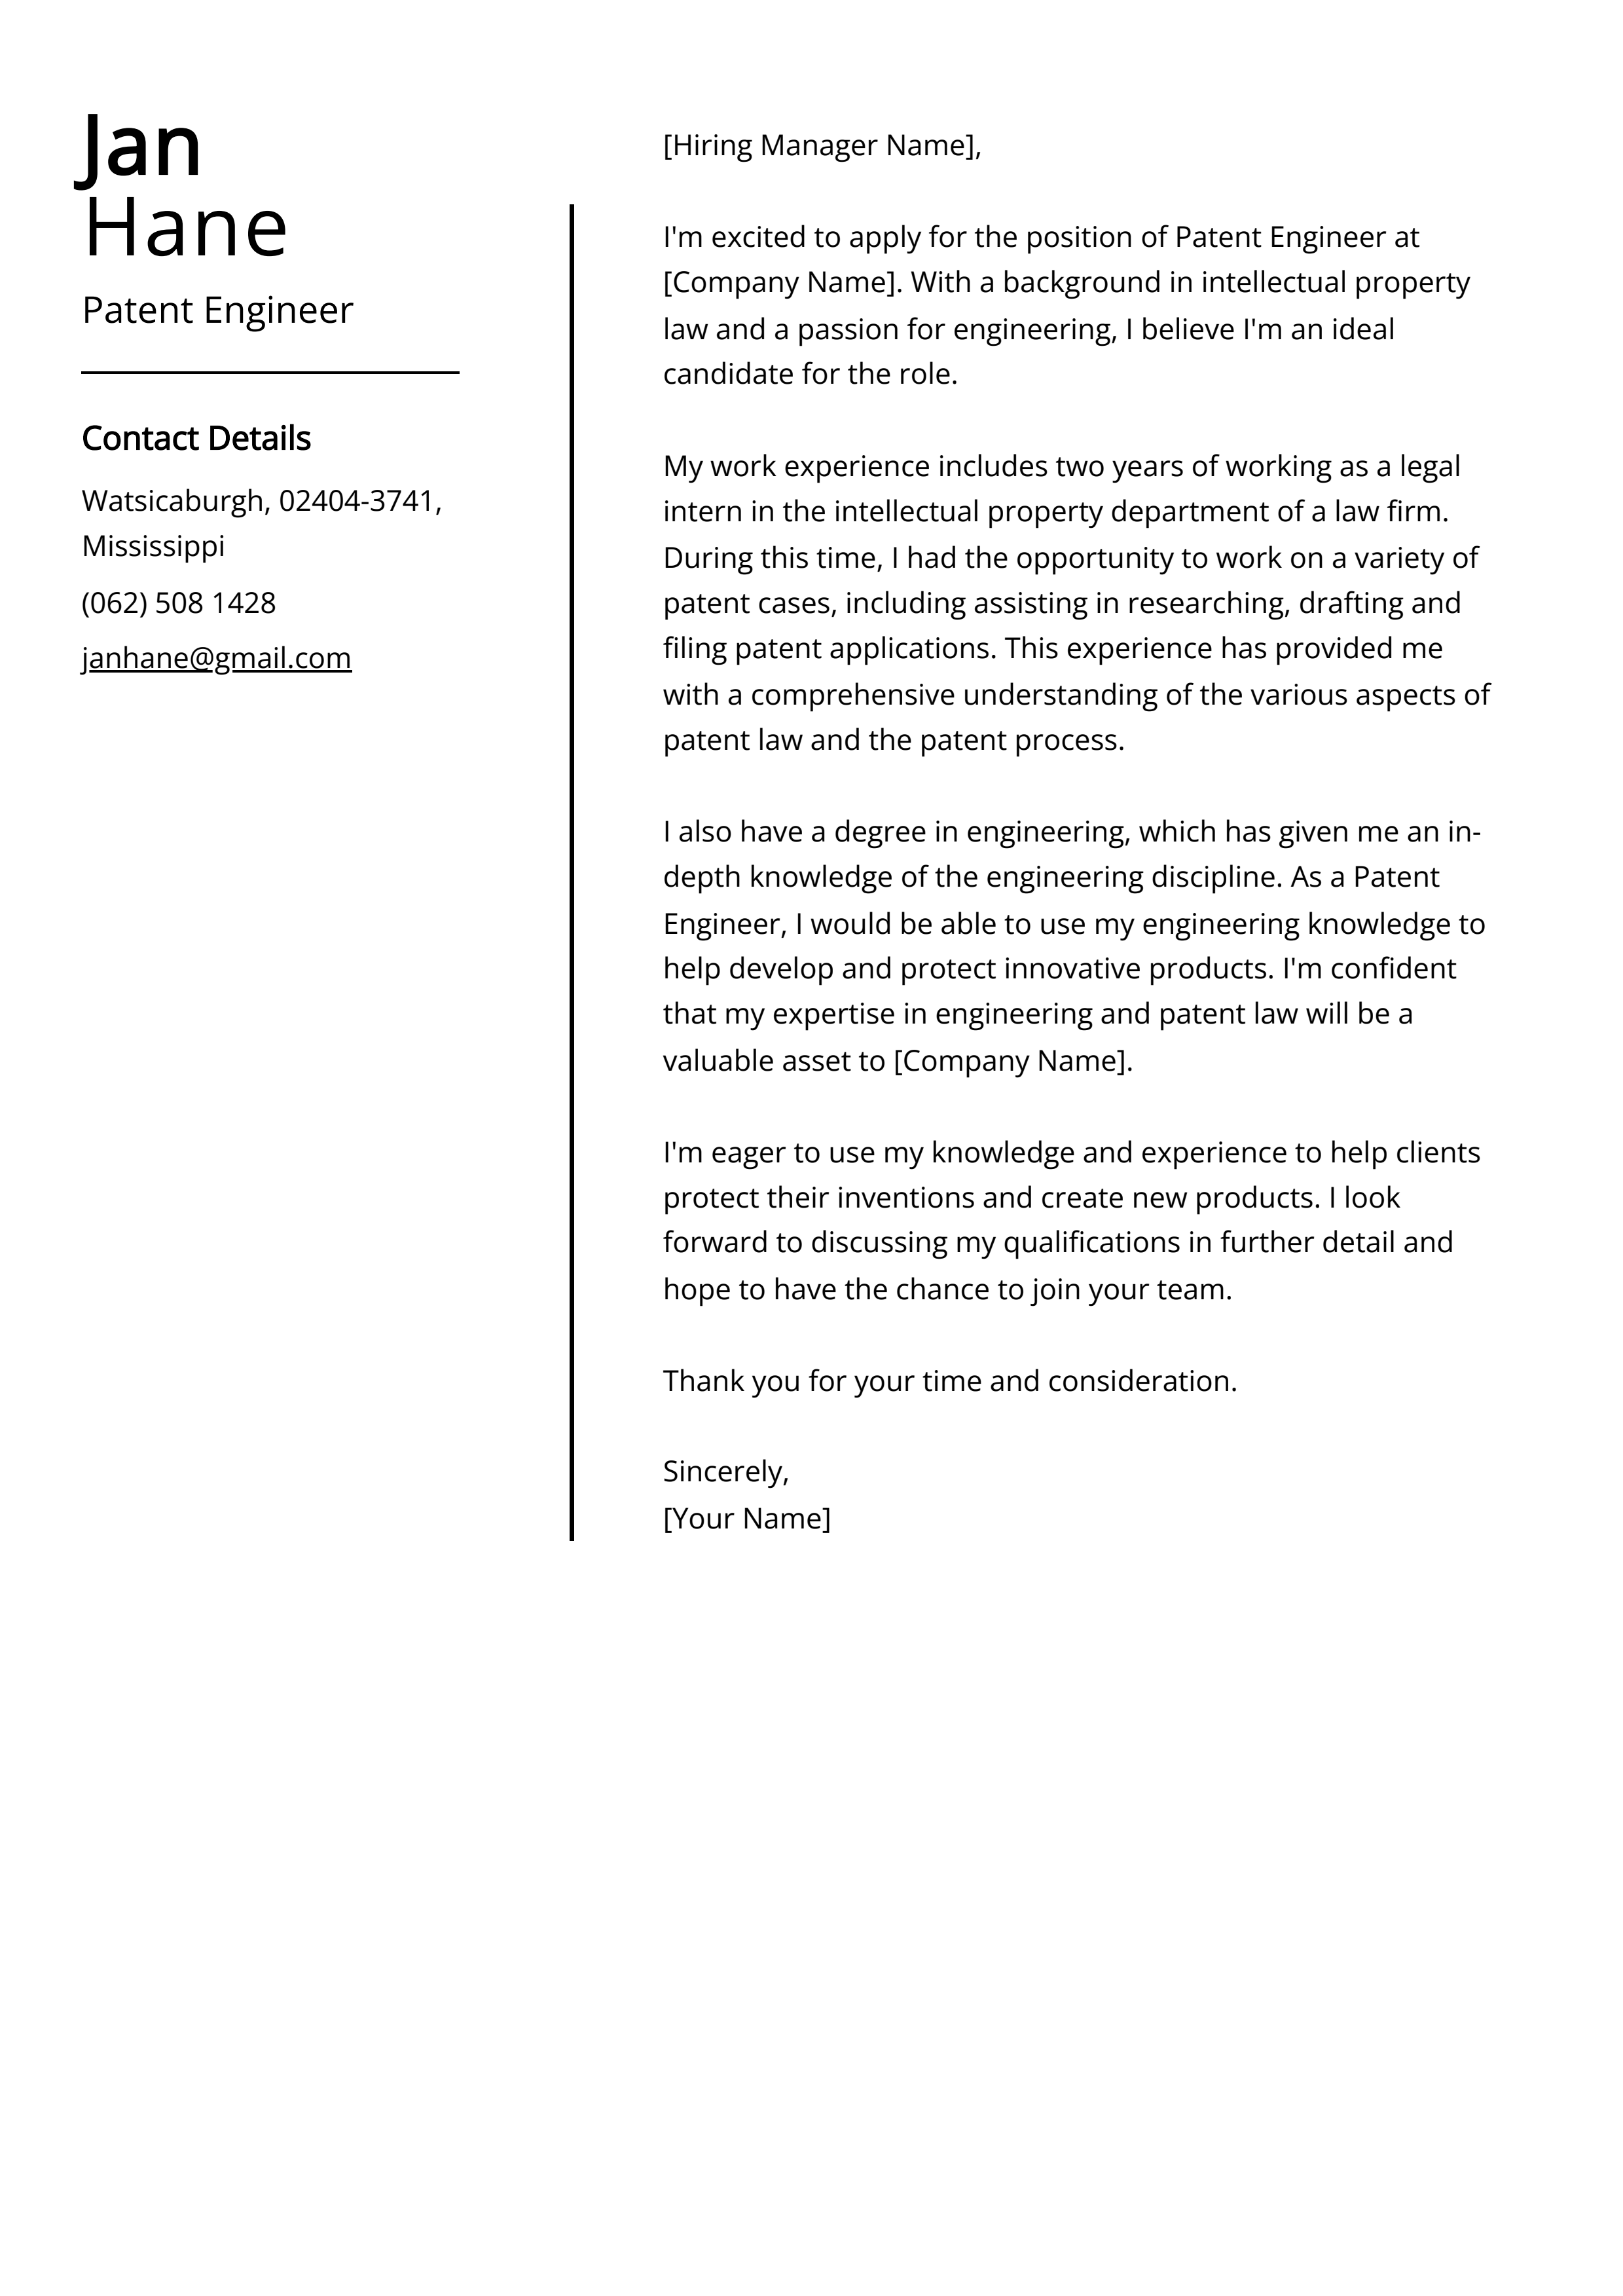 Patent Engineer Cover Letter Example